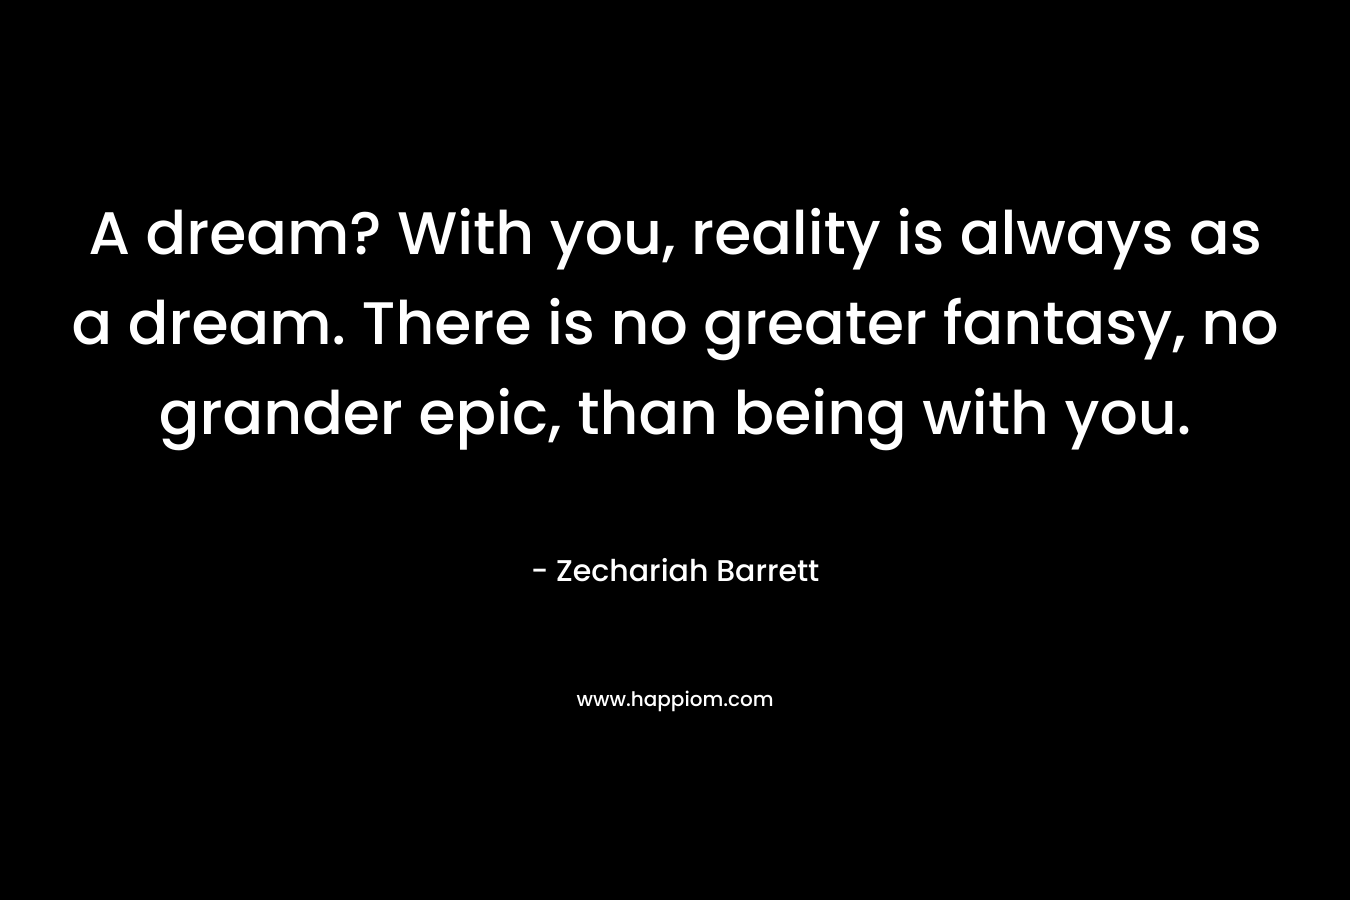 A dream? With you, reality is always as a dream. There is no greater fantasy, no grander epic, than being with you. – Zechariah Barrett